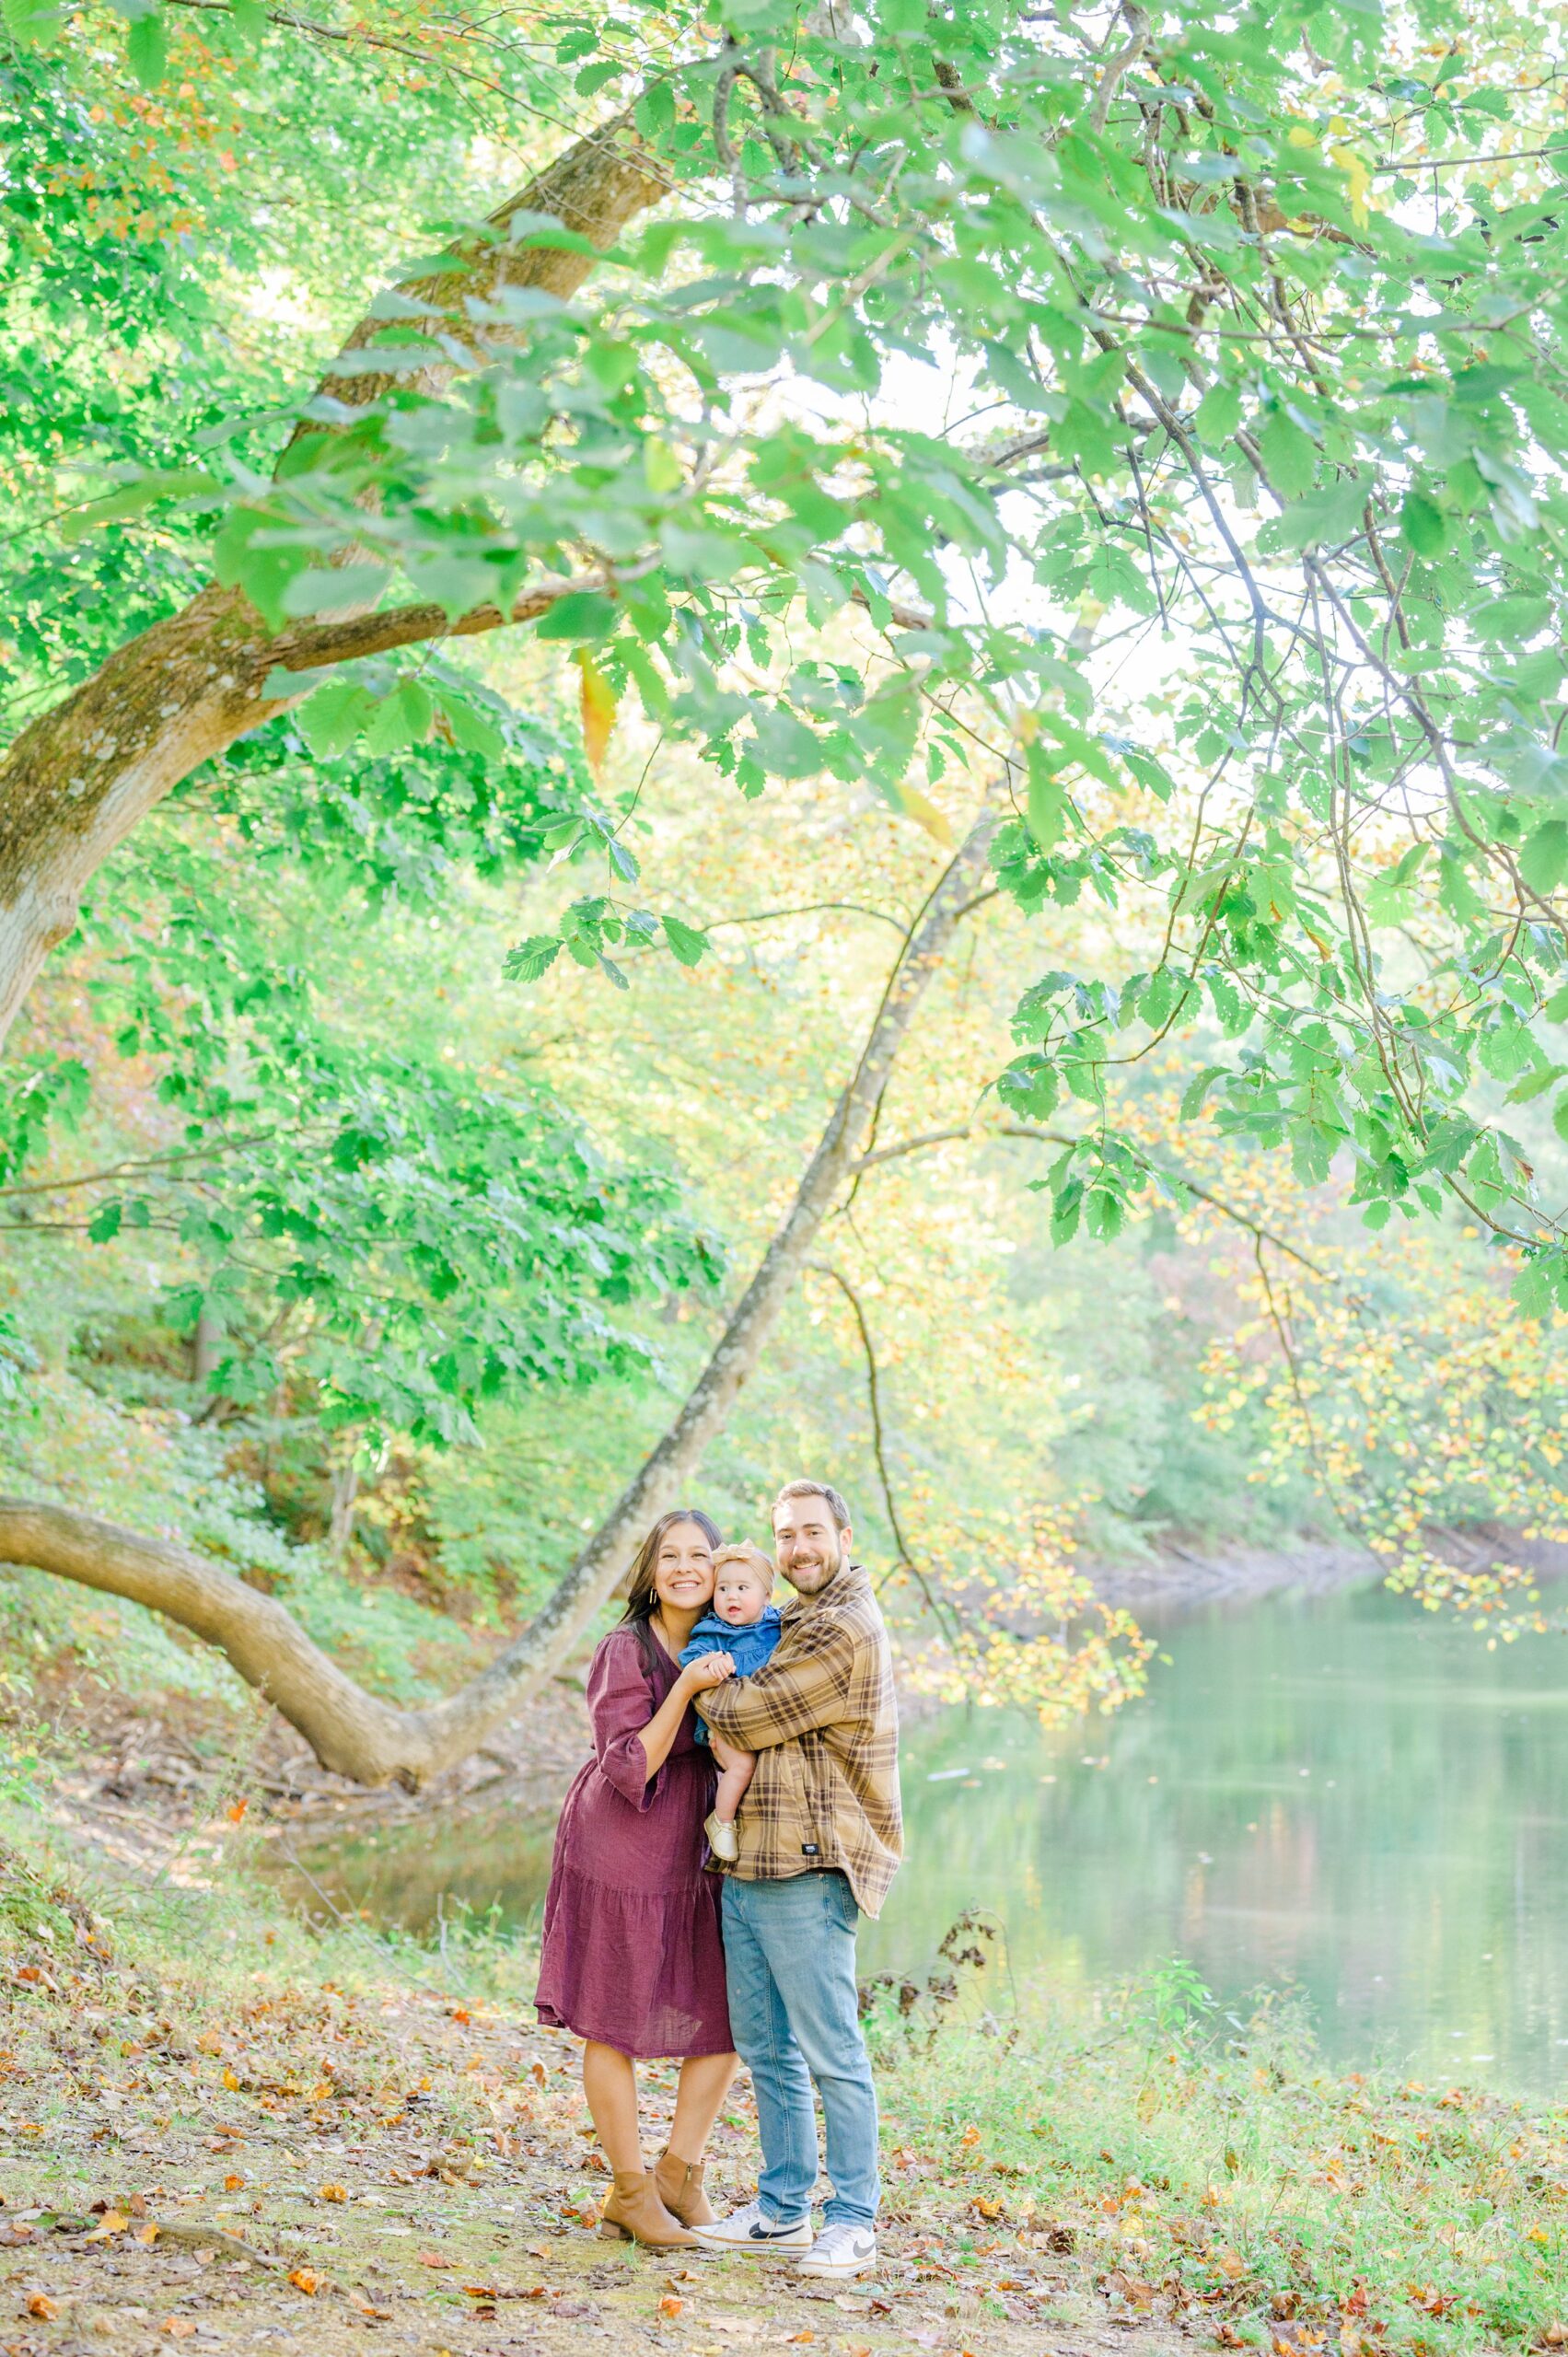 Family photo session at Oregon Ridge Park in Hunt Valley, MD photographed by Baltimore Portrait Photographer Cait Kramer.